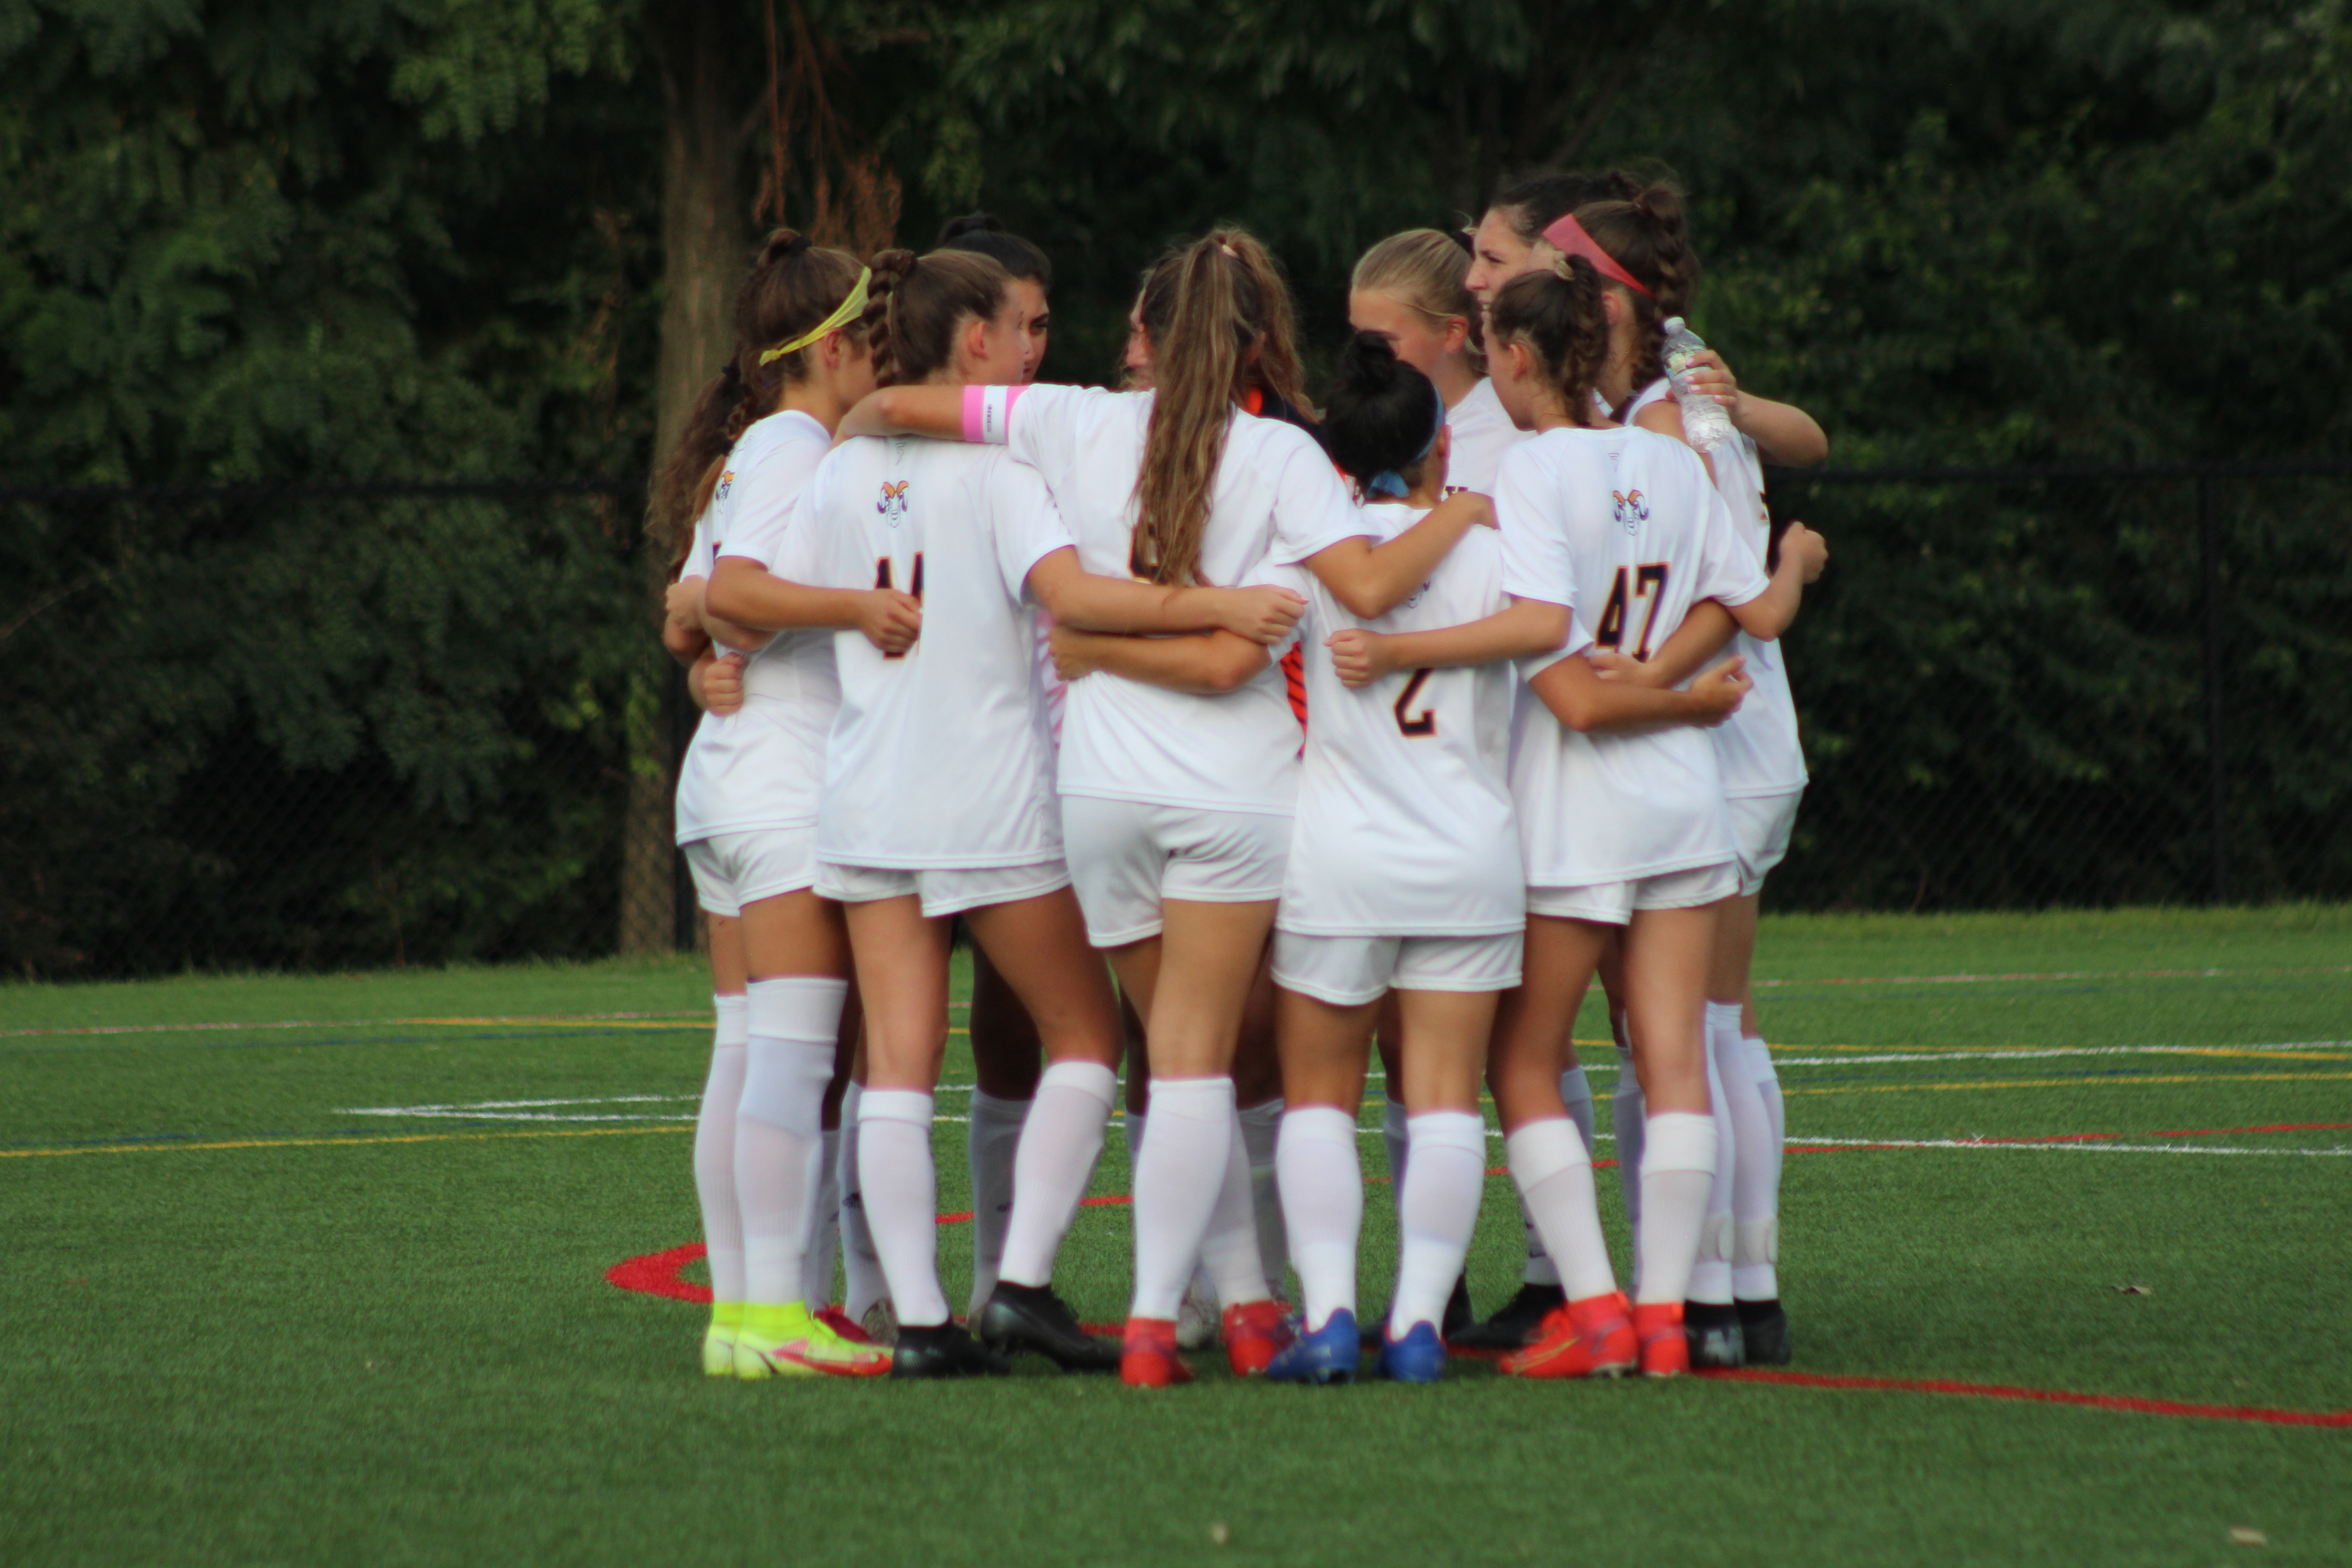 Ramsey women's soccer team huddles up before the game.